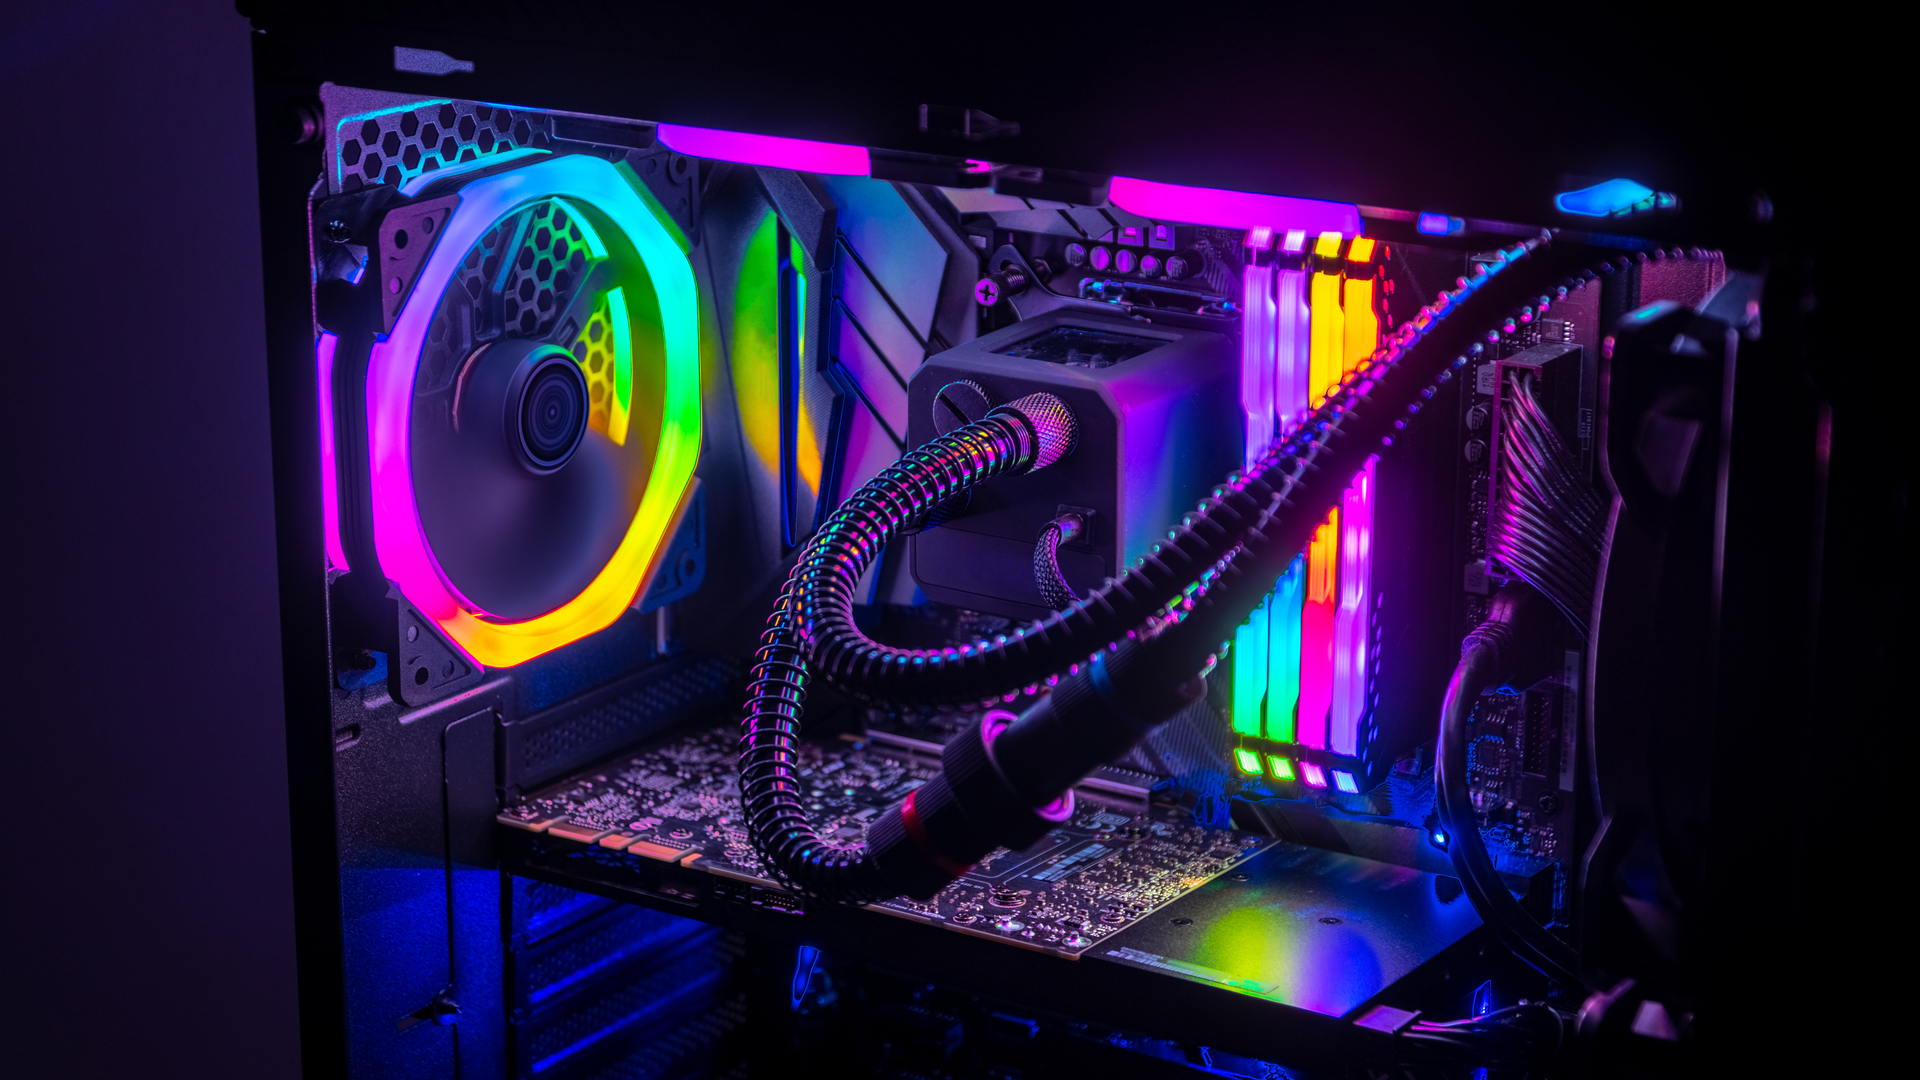 The inside of a gaming PC with lots of RGB lighting